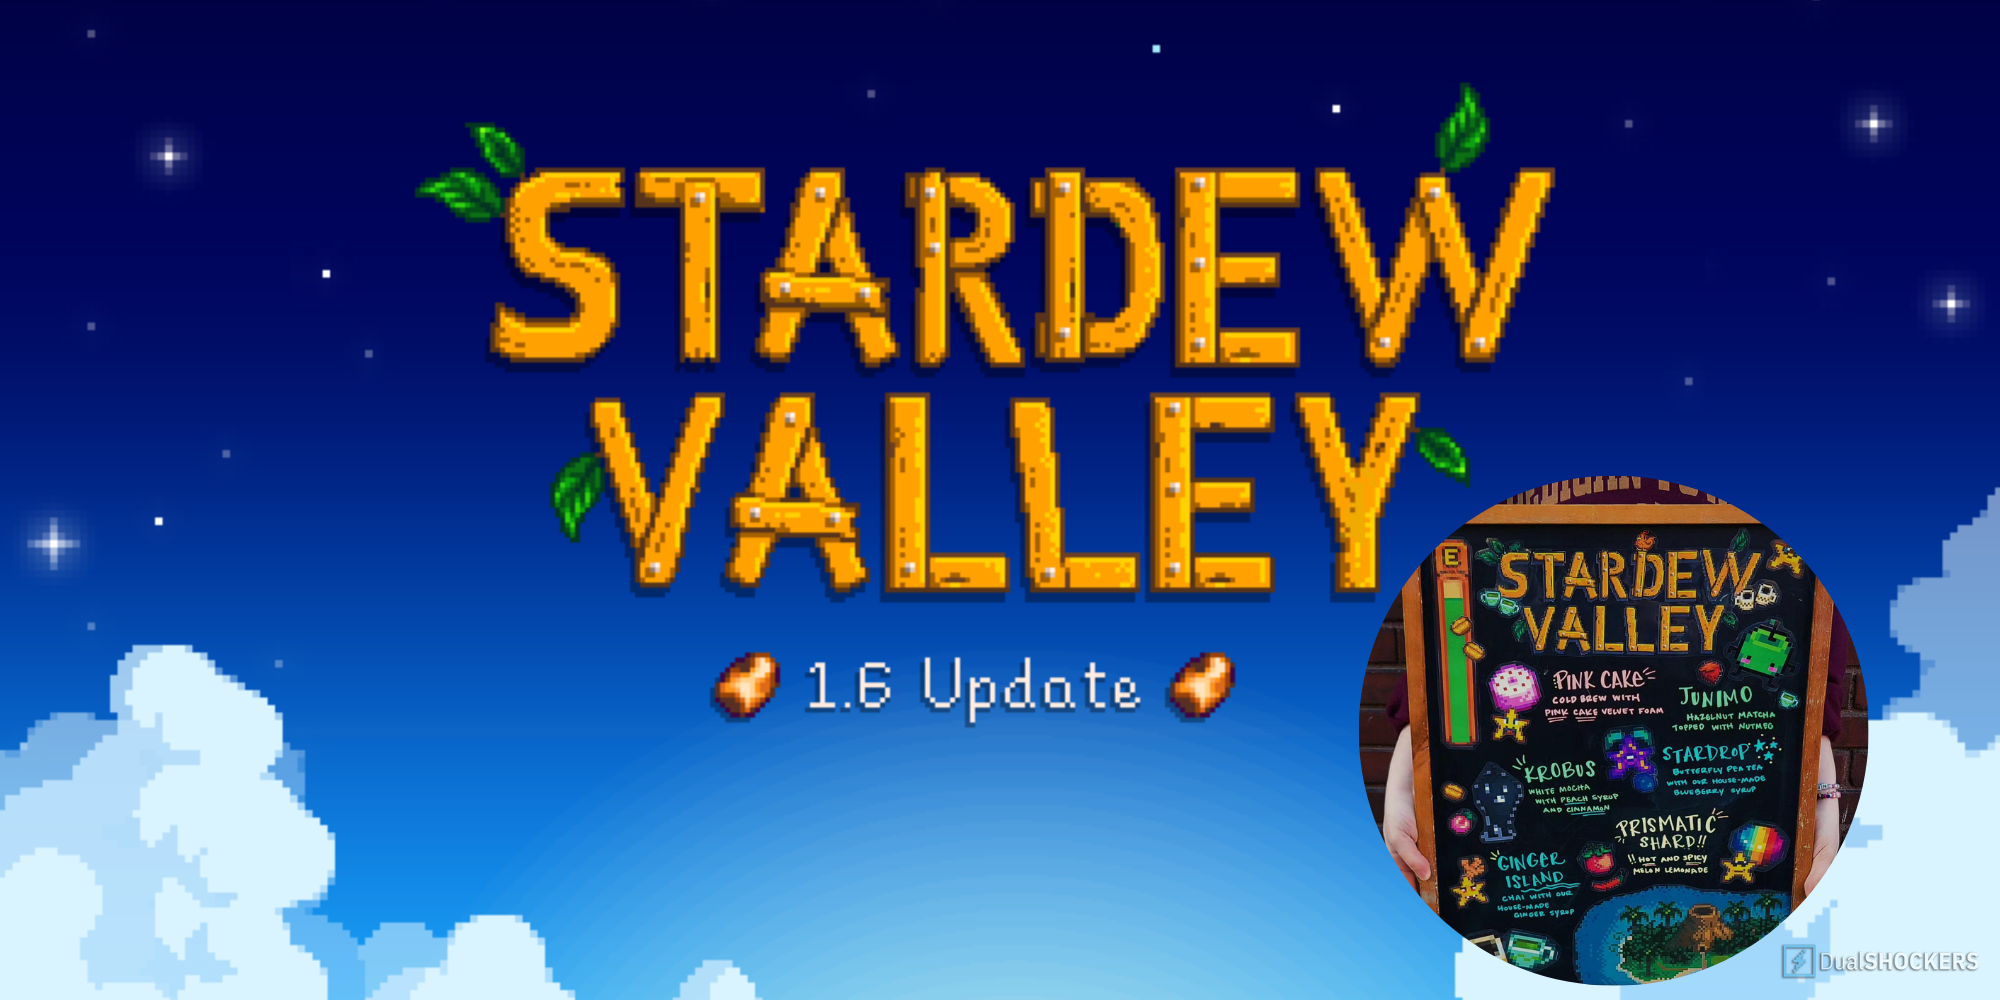 stardew valley 1.6 update featured menu from cafe owner